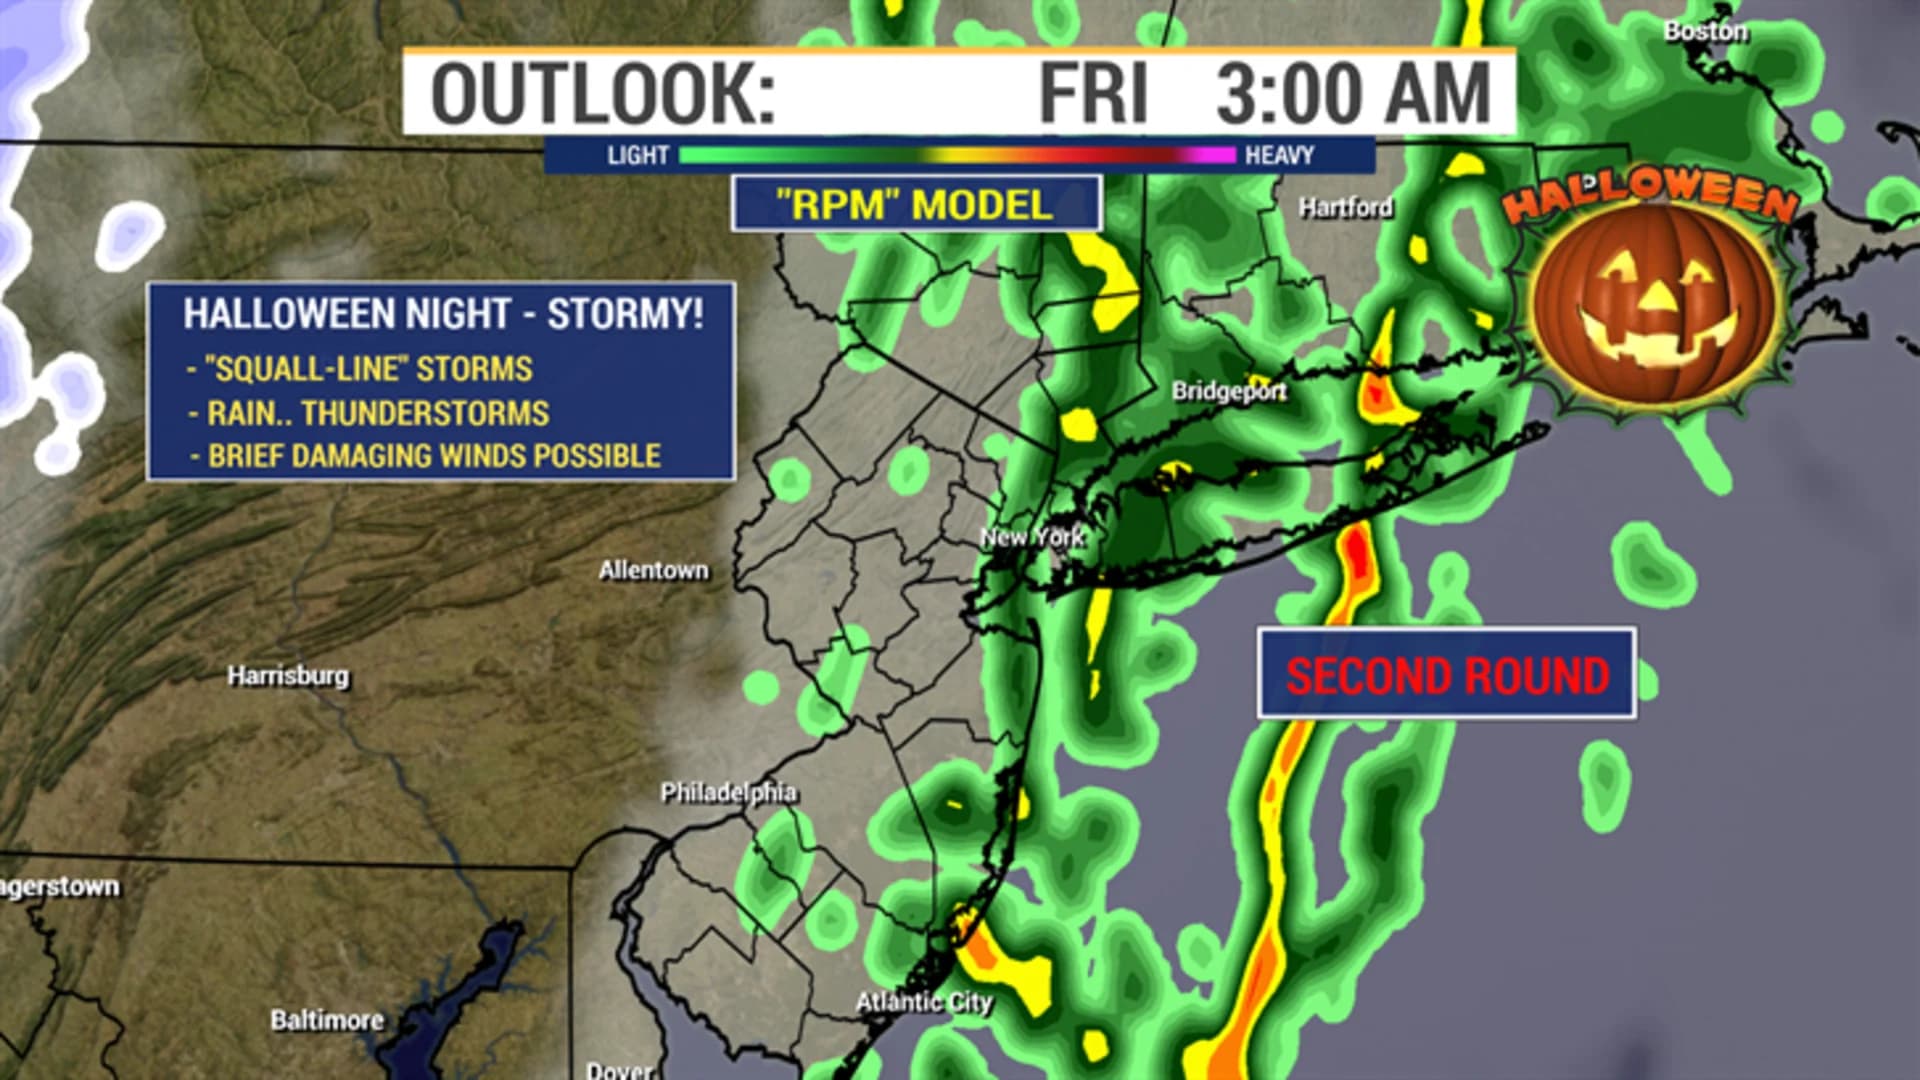 Storms expected to bring damaging winds, heavy rain to New Jersey